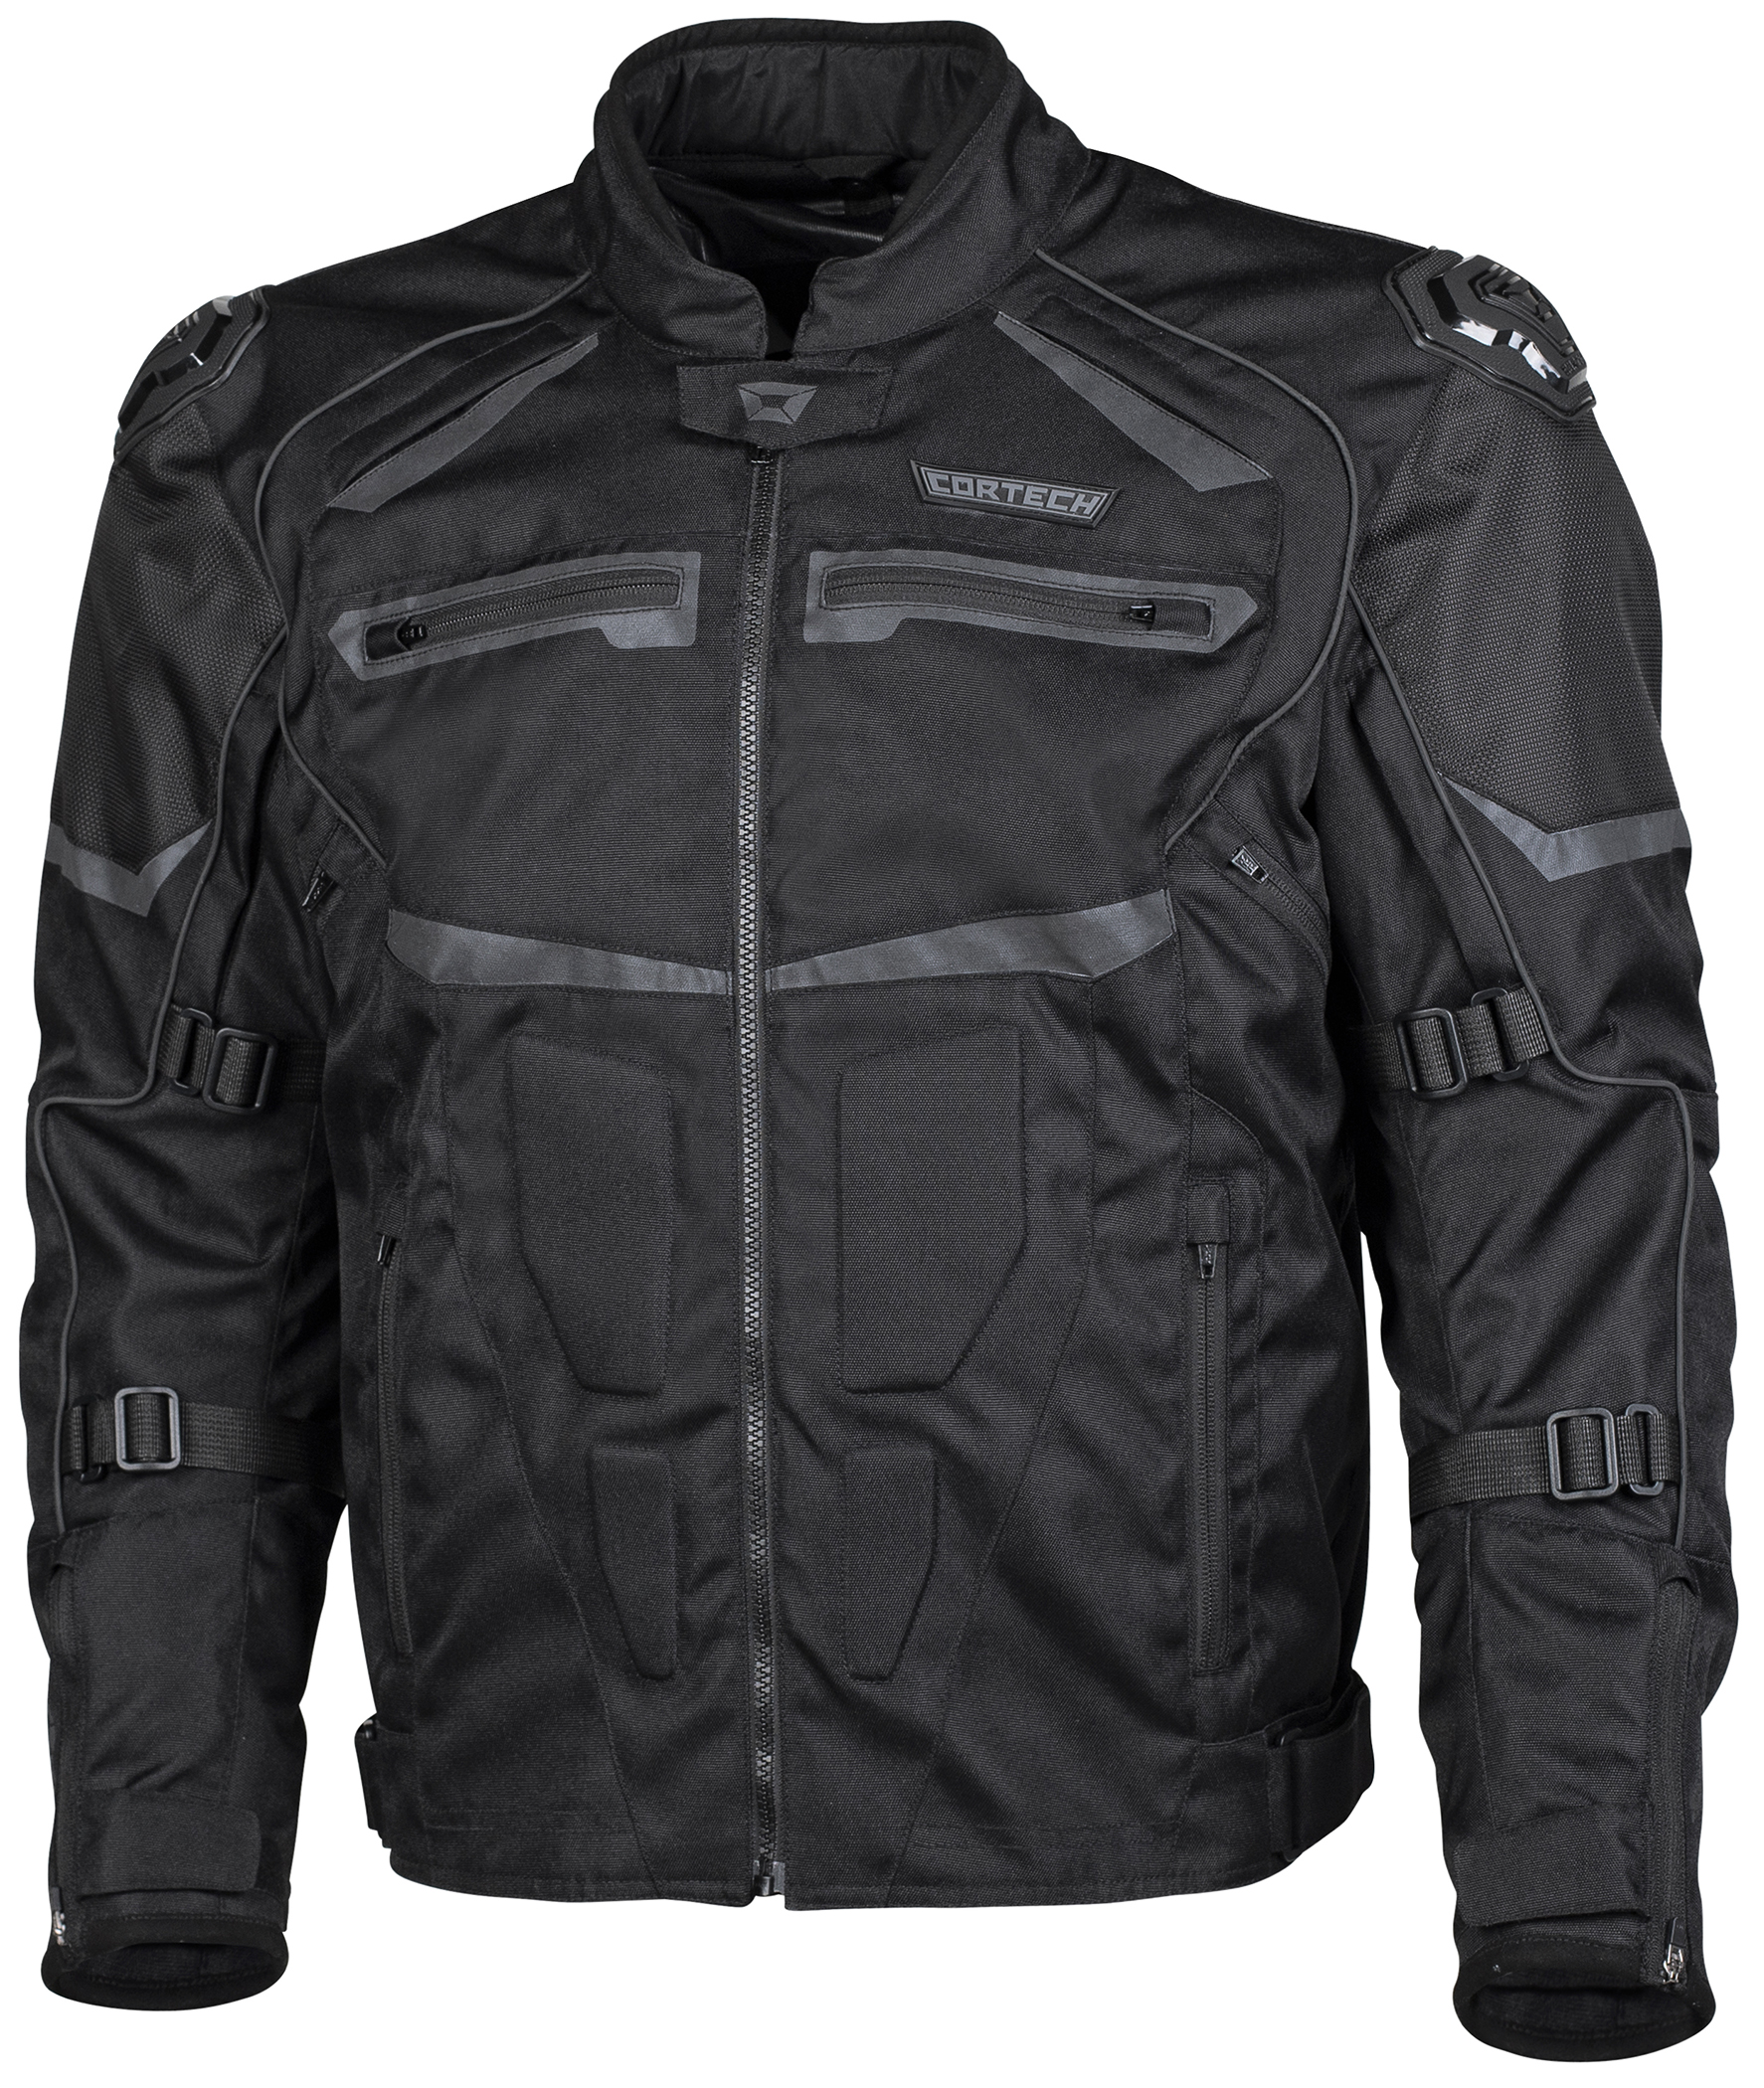 Hyper-Tec Armored Motorcycle Riding Jacket Black Large - Click Image to Close